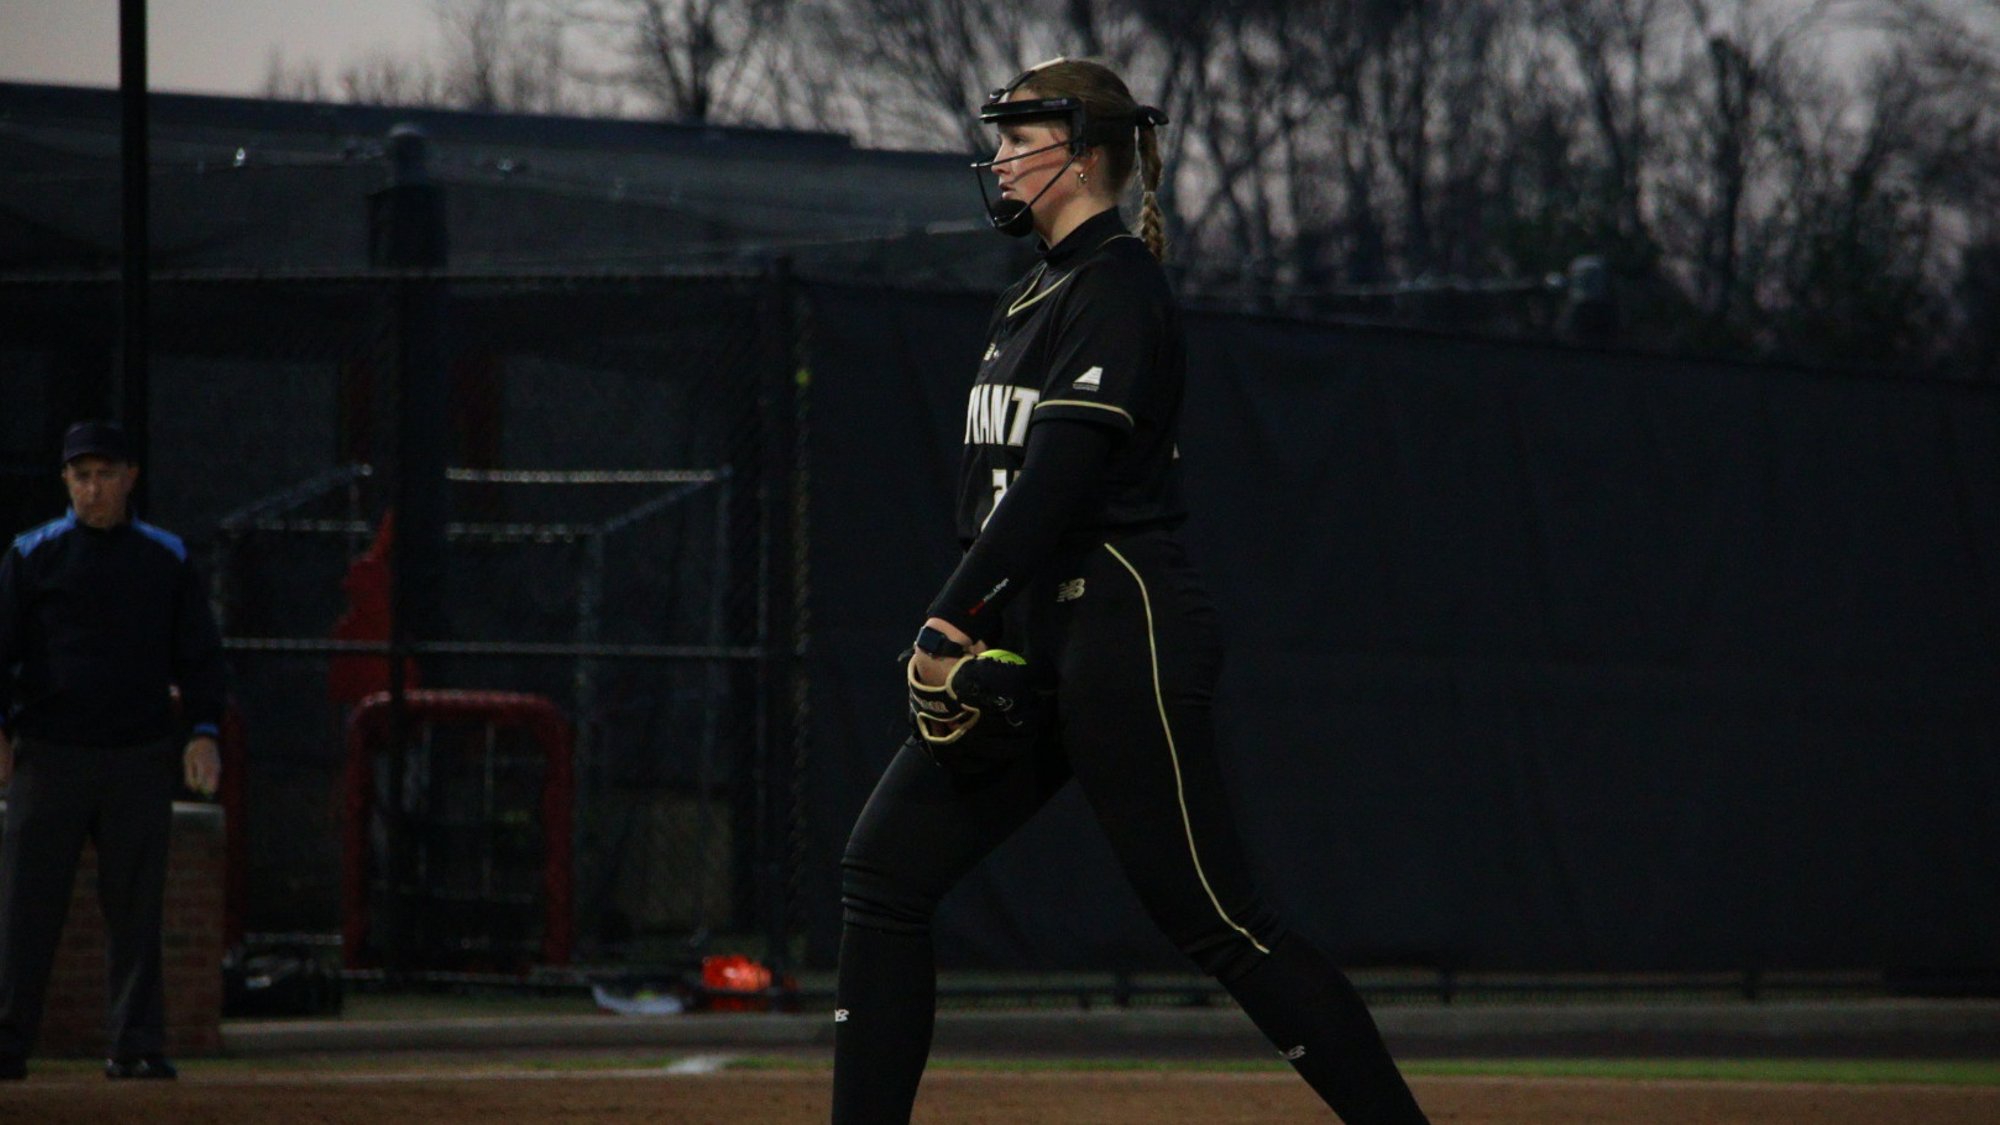 Rohwer goes yard and Kenney pitches CG in victory against Maryland